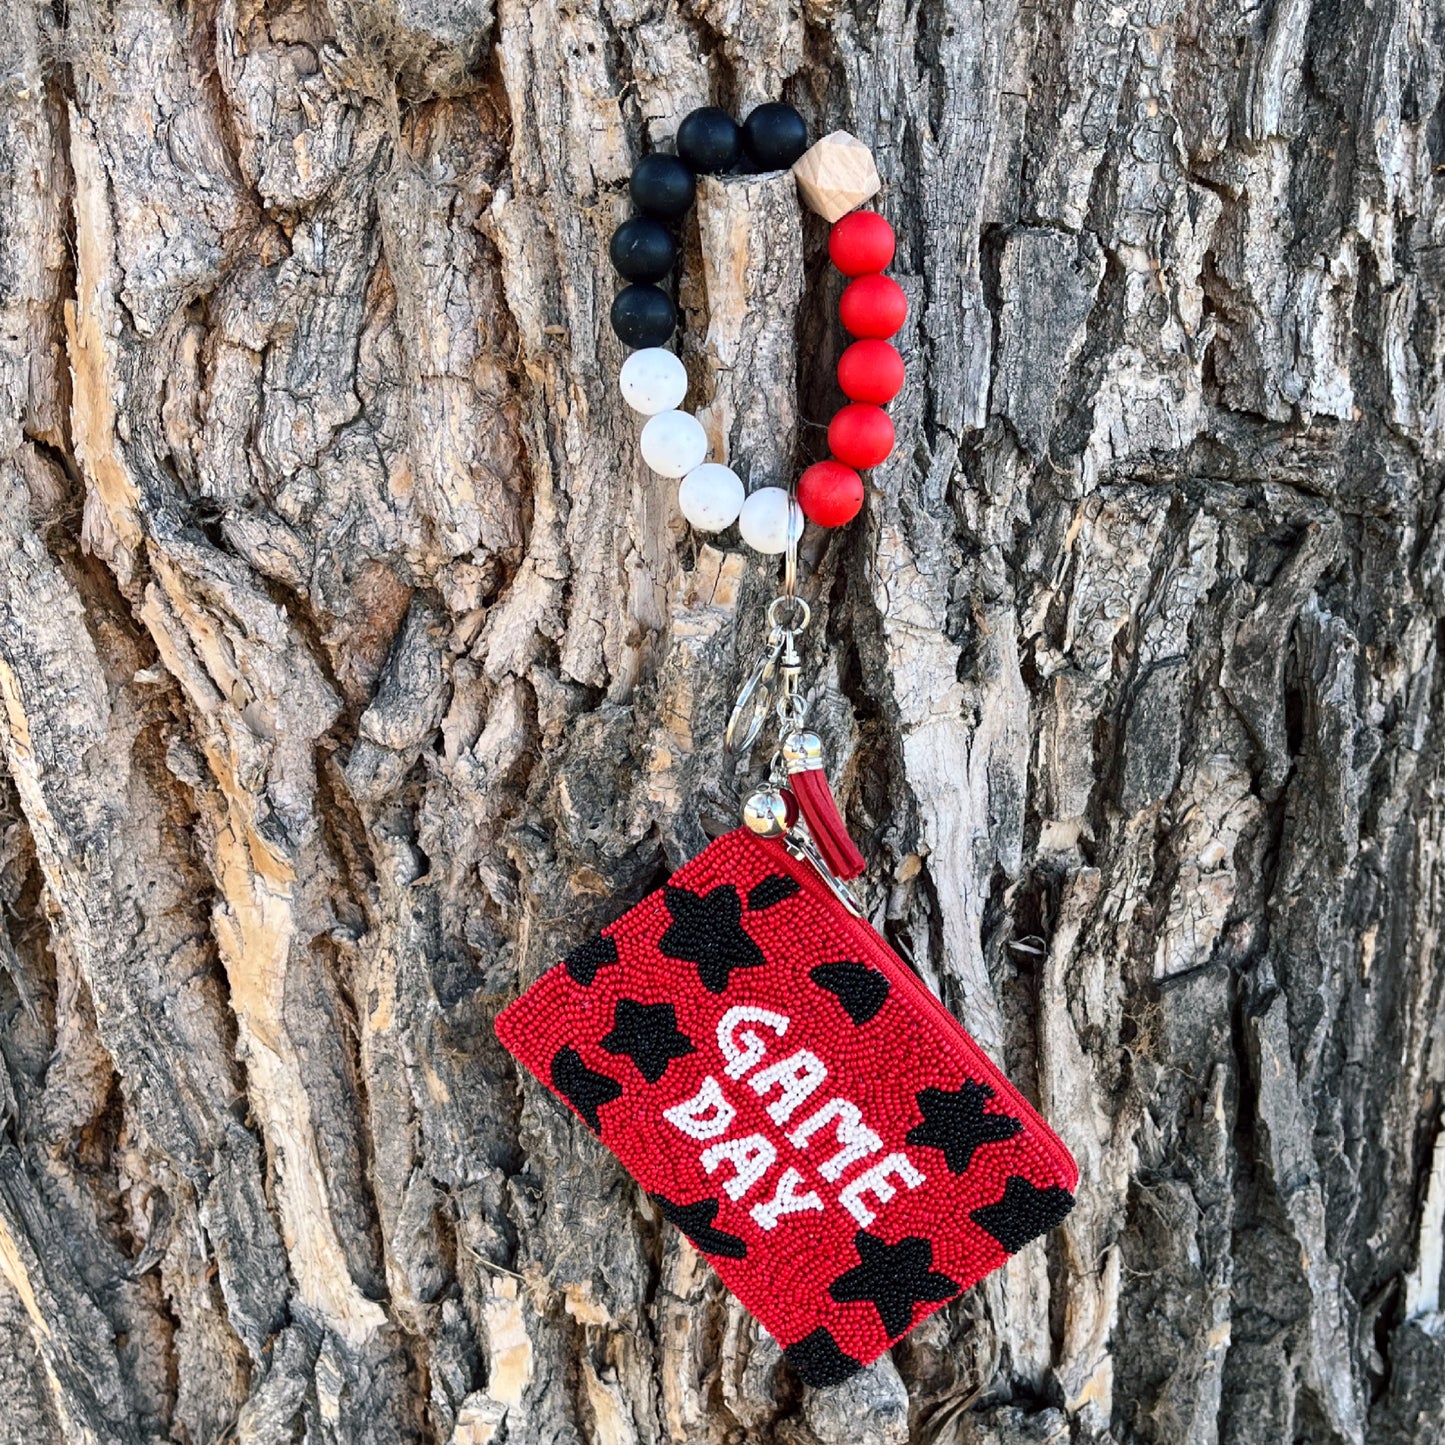 BLACK & RED 'GAME DAY' MINI SEED BEAD COIN PURSE KEY RING